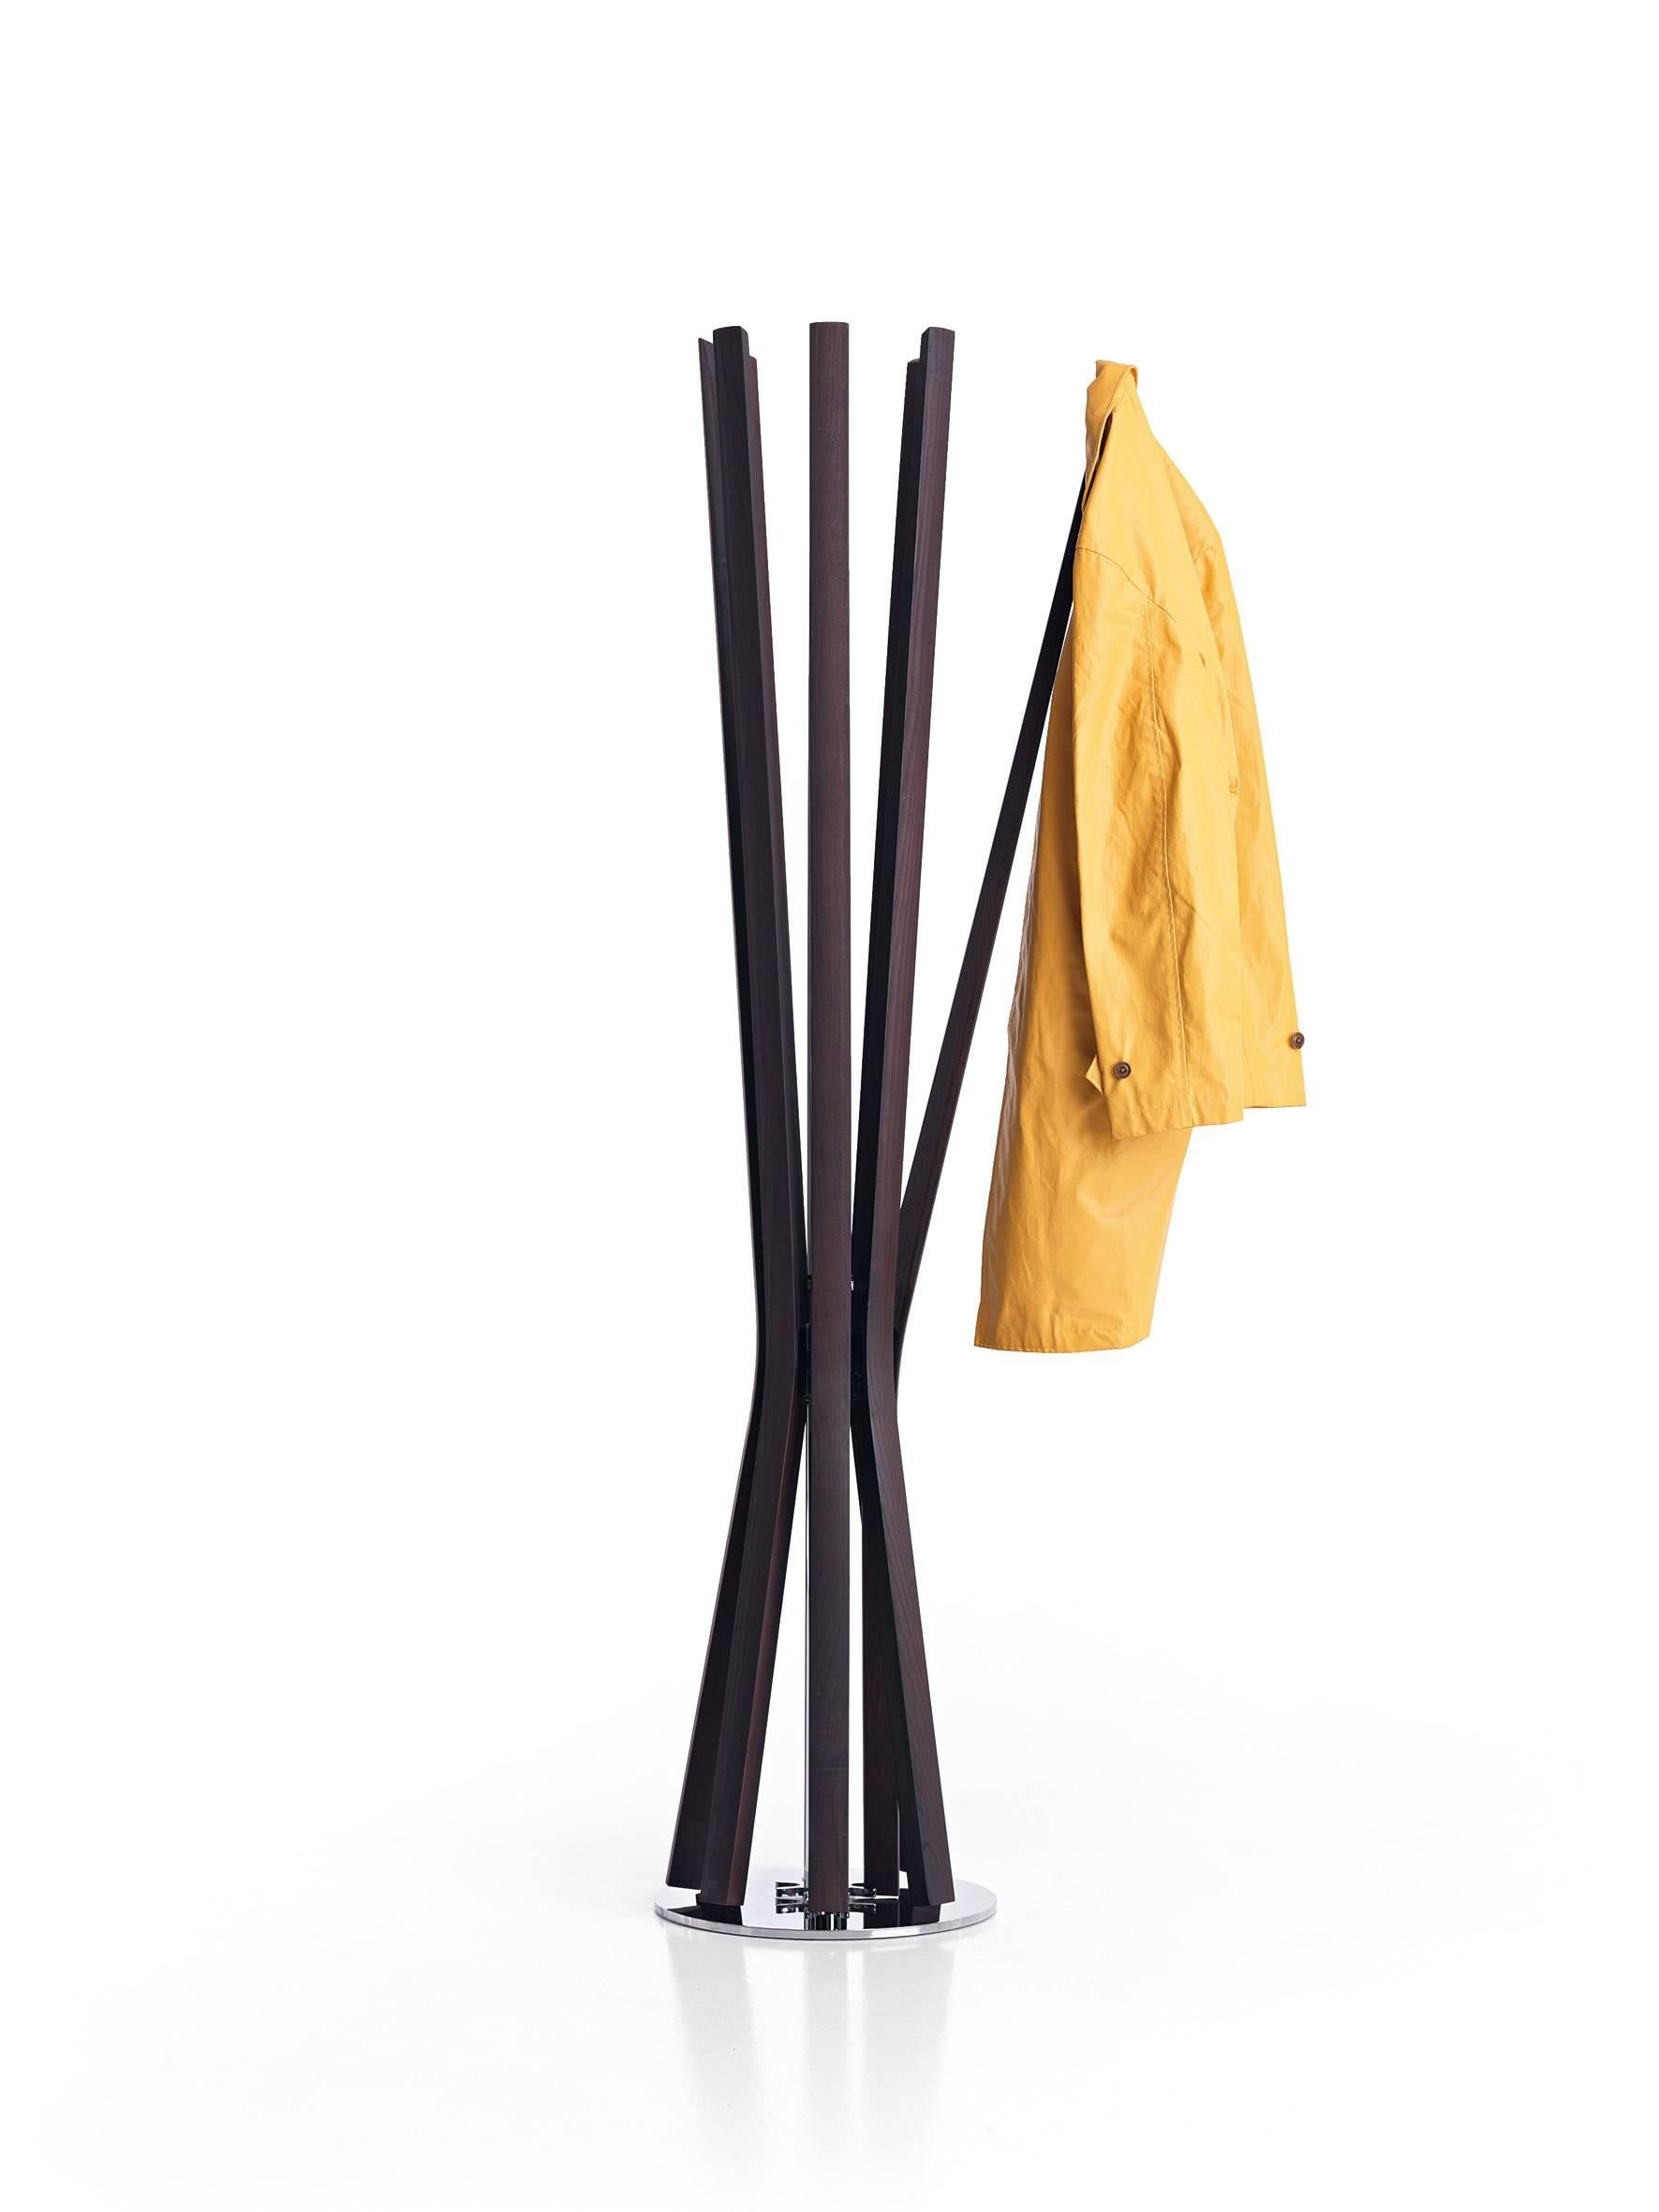 Coat-hanger with chrome steel structure and eight arms made of moka ashwood. The Bloom coat hanger can rotate around the central stem allowing easy access to each of the arms which open individually when weighted with a coat and close when clothing